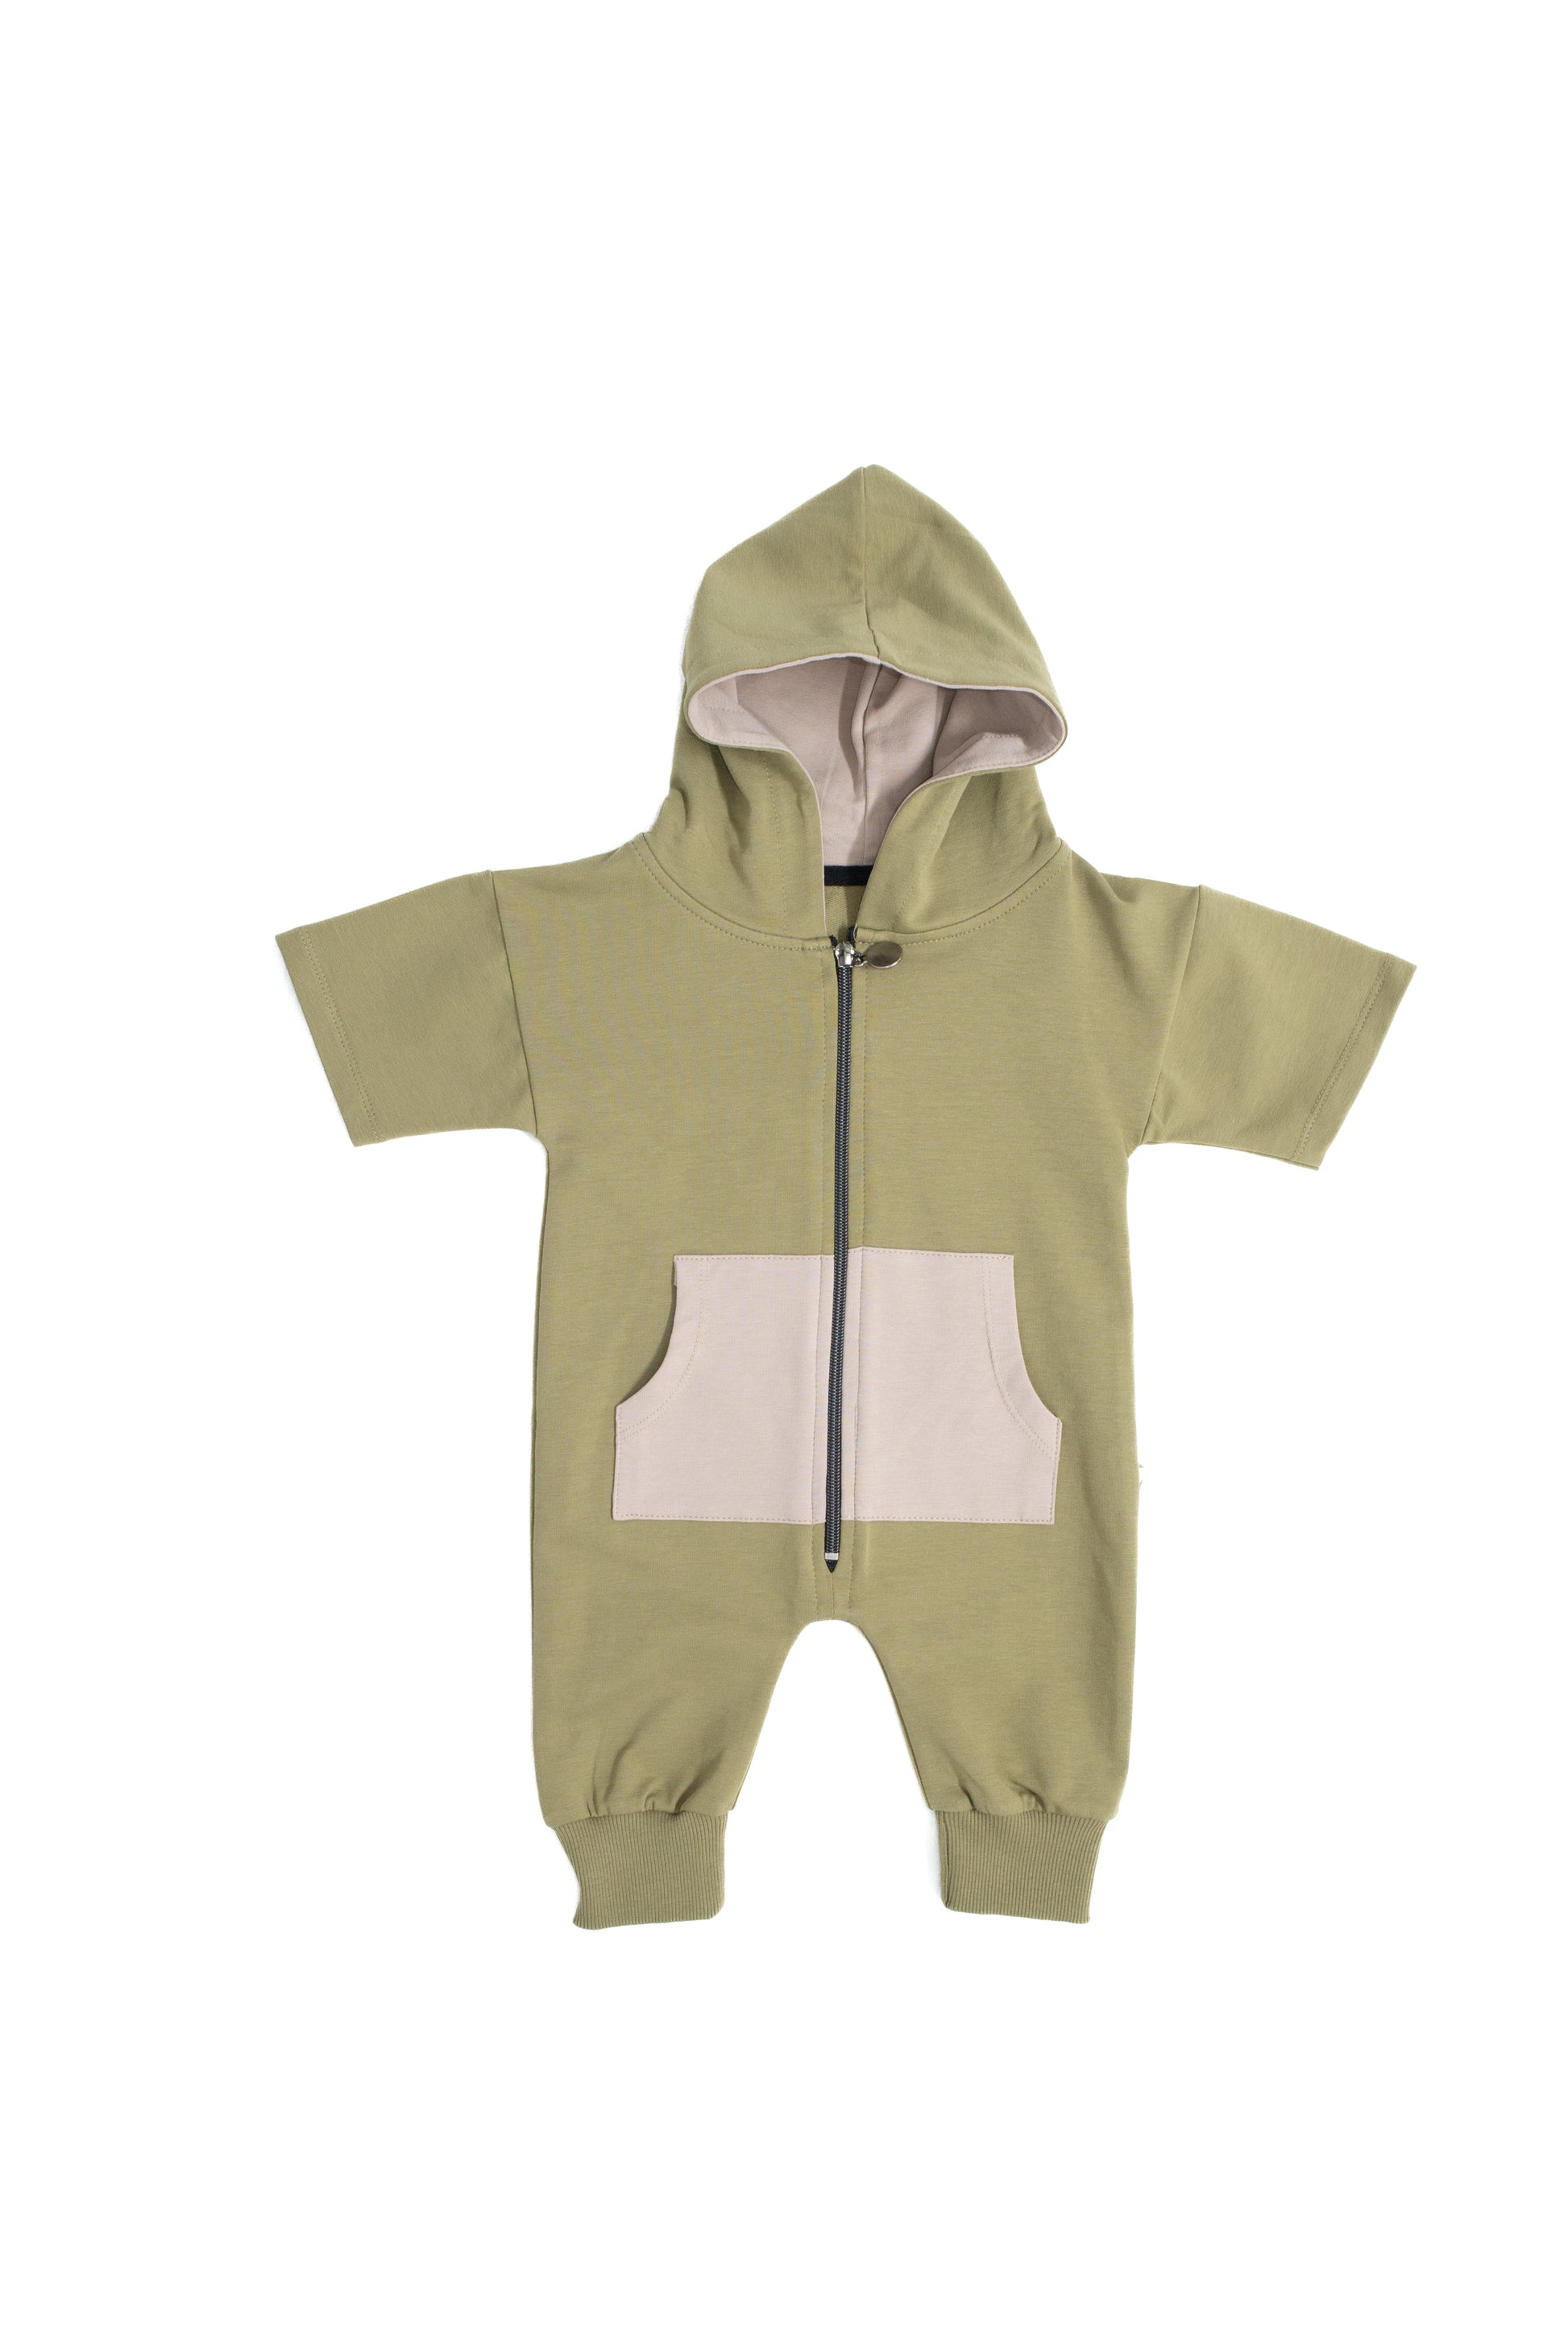 Baby Unisex 100% Cotton Hooded and Zippered Jumpsuit